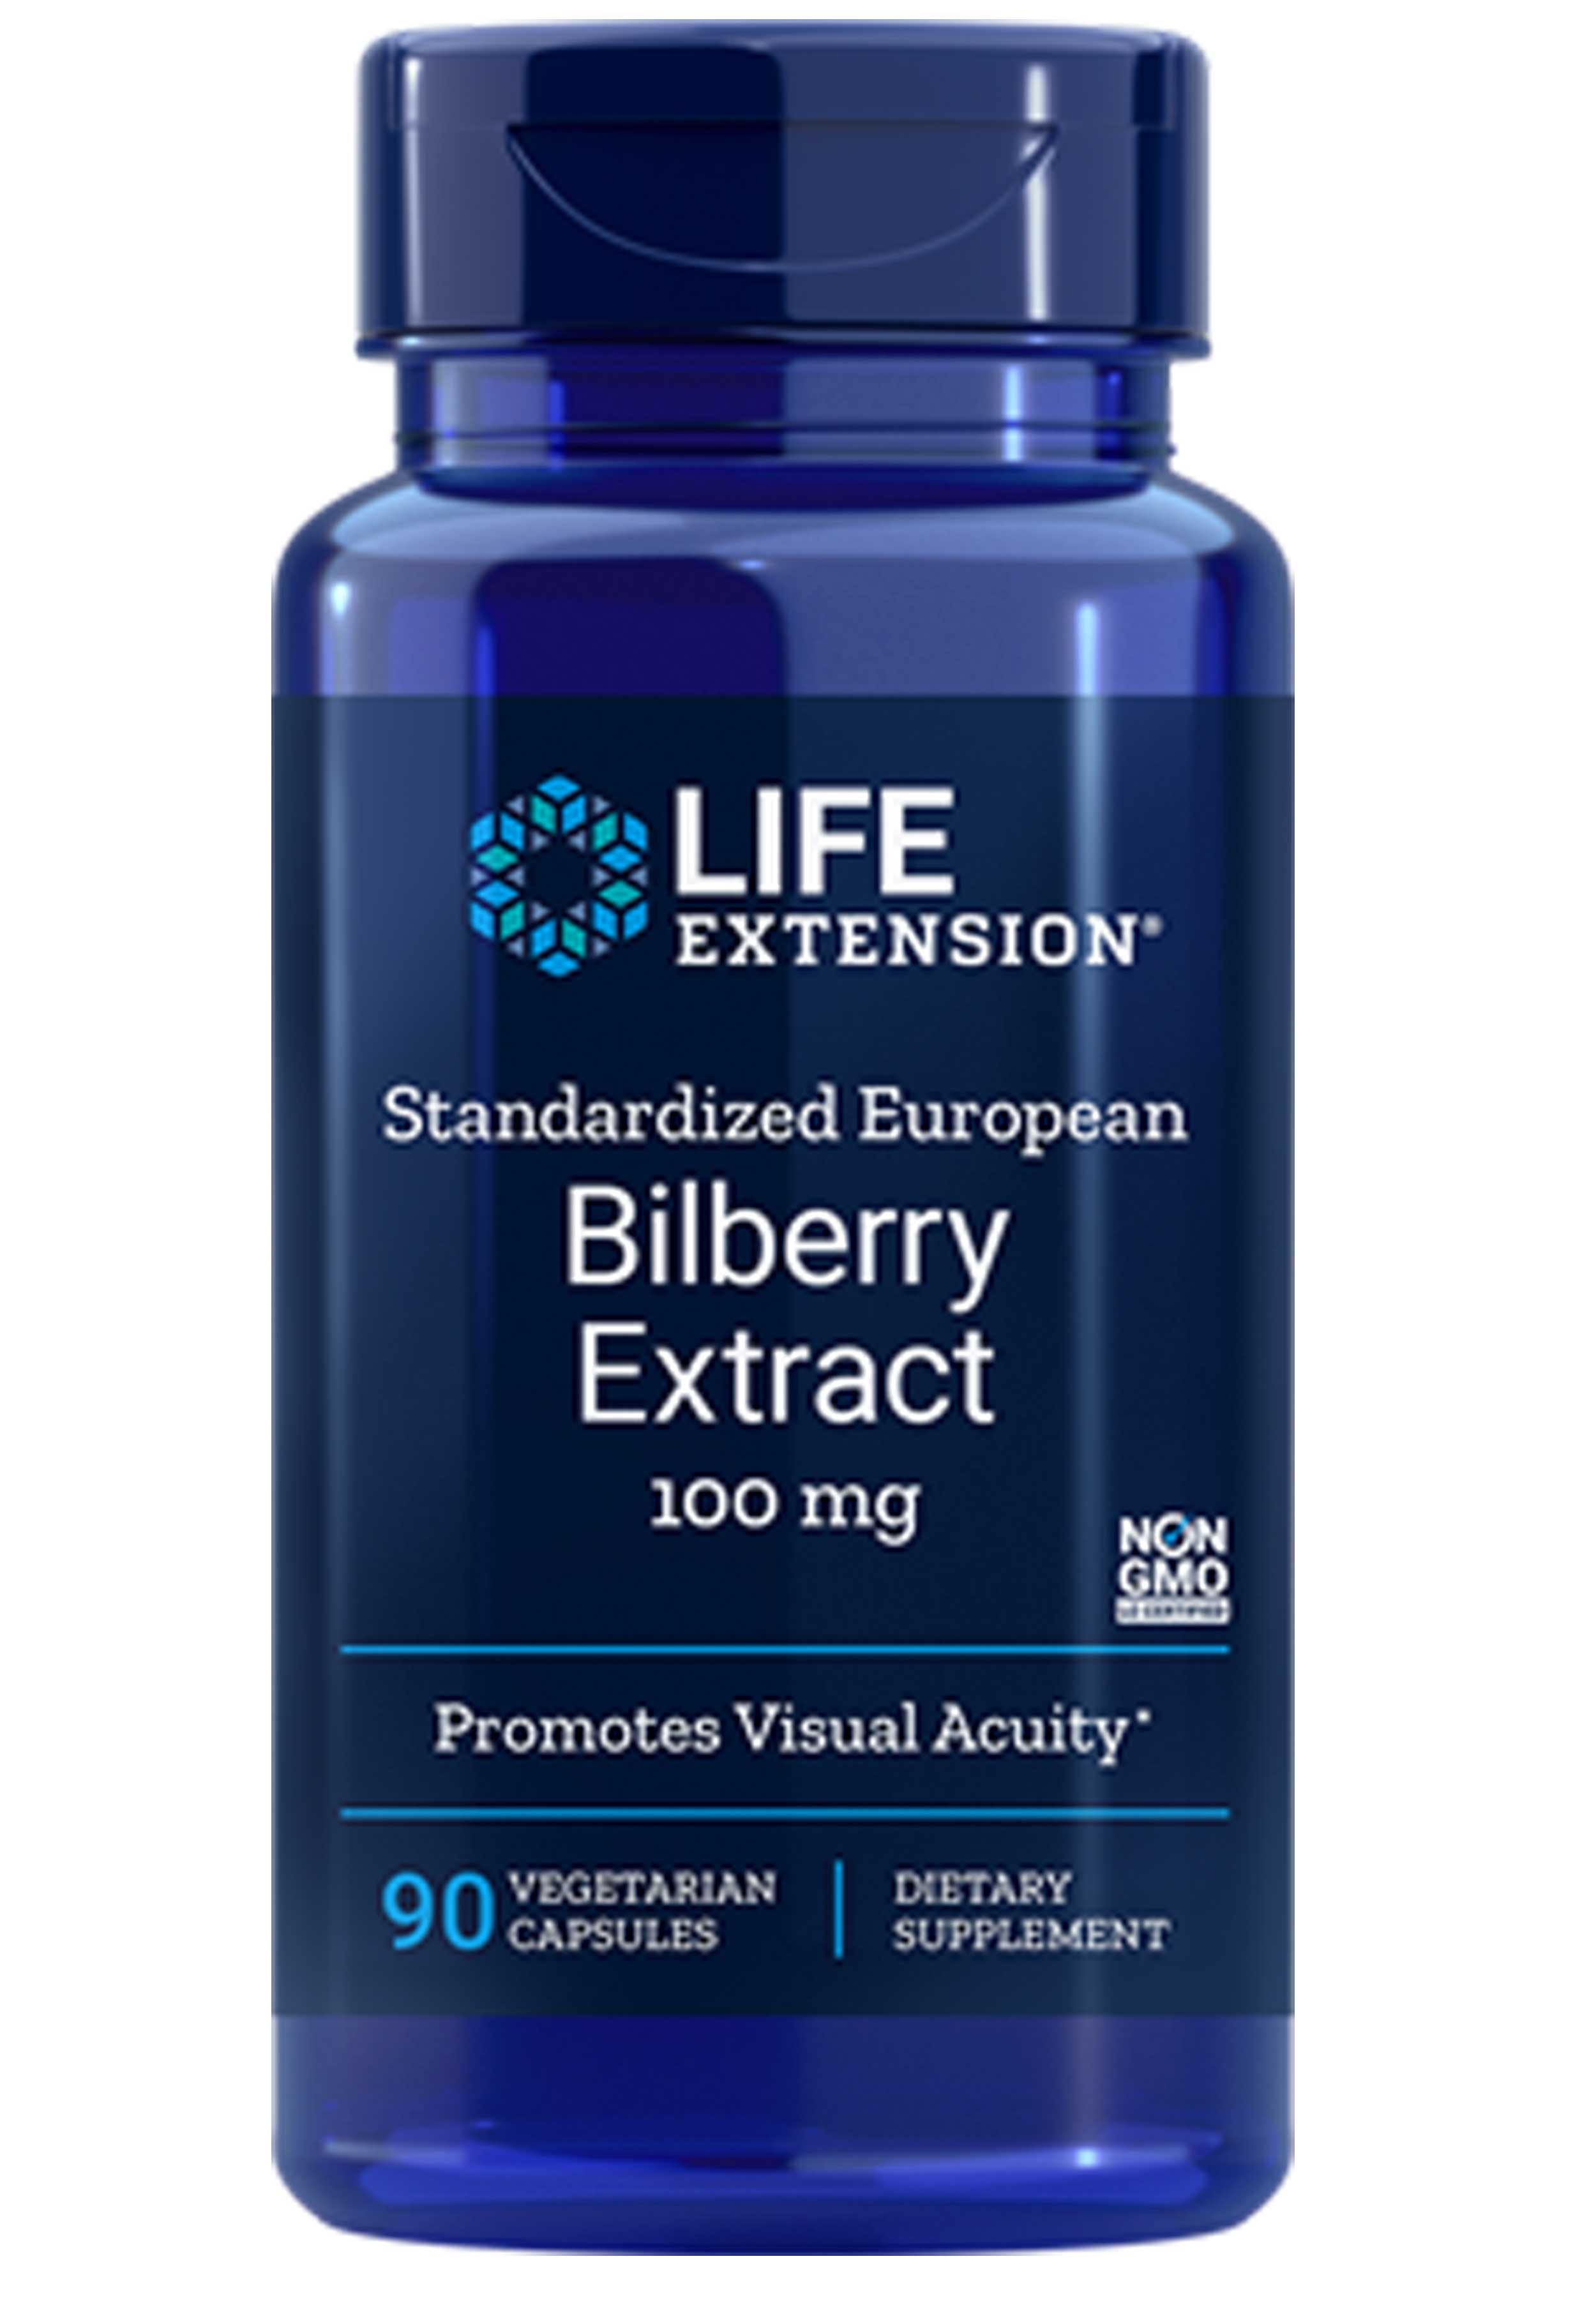 Life Extension Bilberry Extract